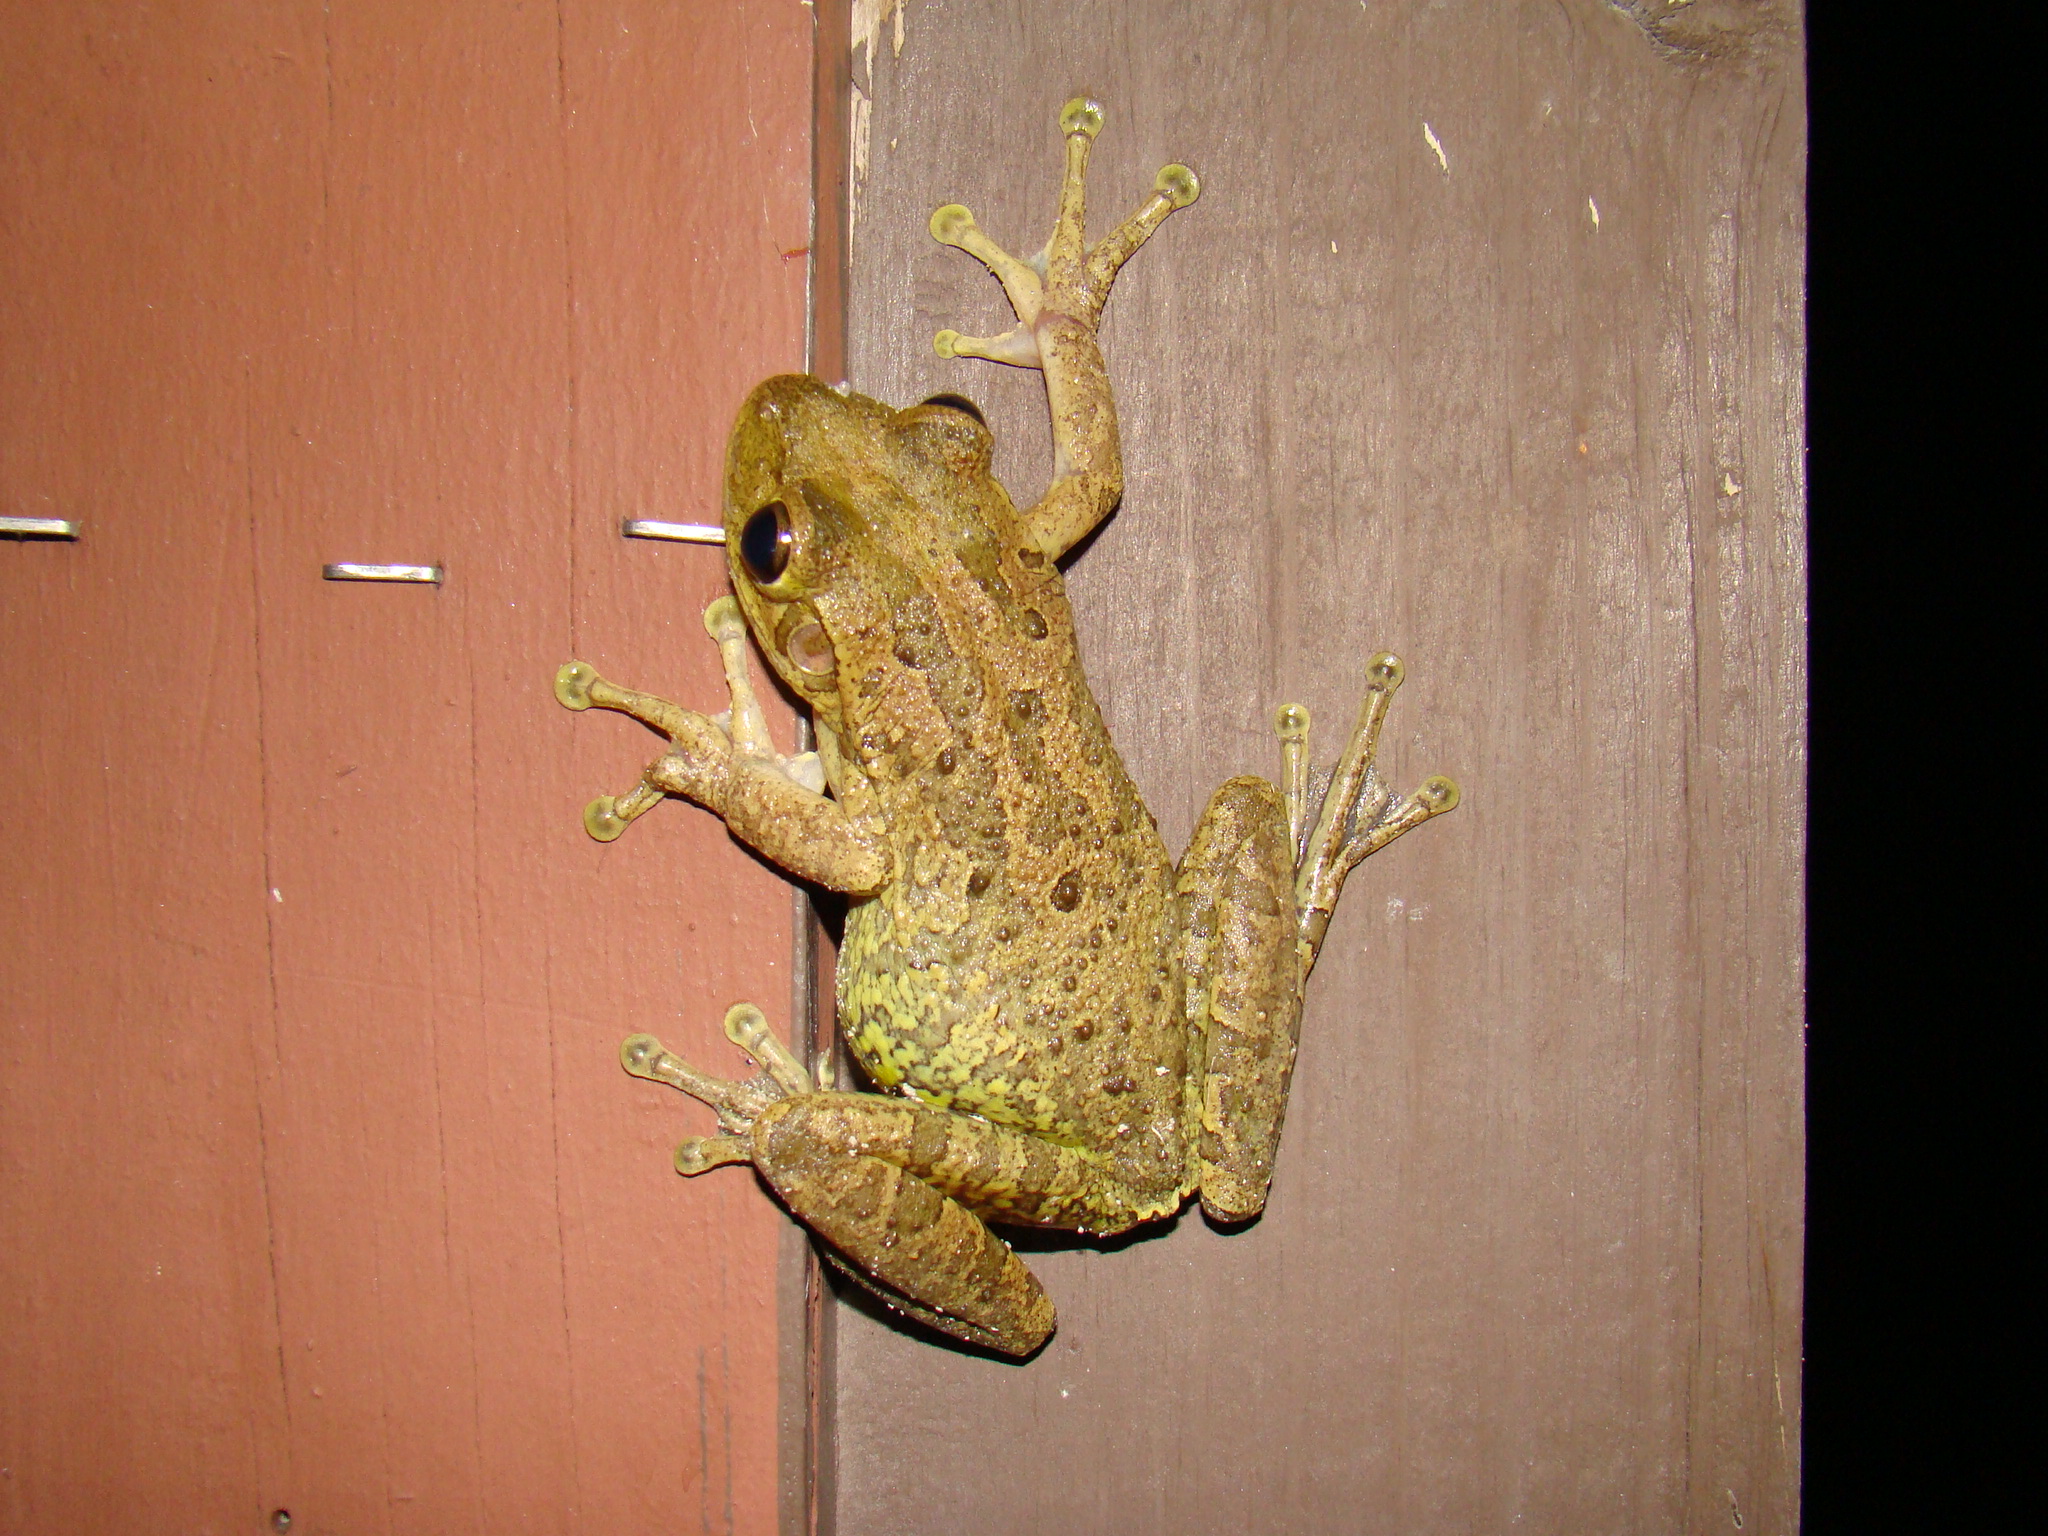 <strong>Source:</strong> USGS National Wetlands Research Center. <strong>Photographer:</strong> Brad M. Glorioso. Collier County, Florida.<br /><em>Osteopilus septentrionalis* </em> - Cuban Treefrog*